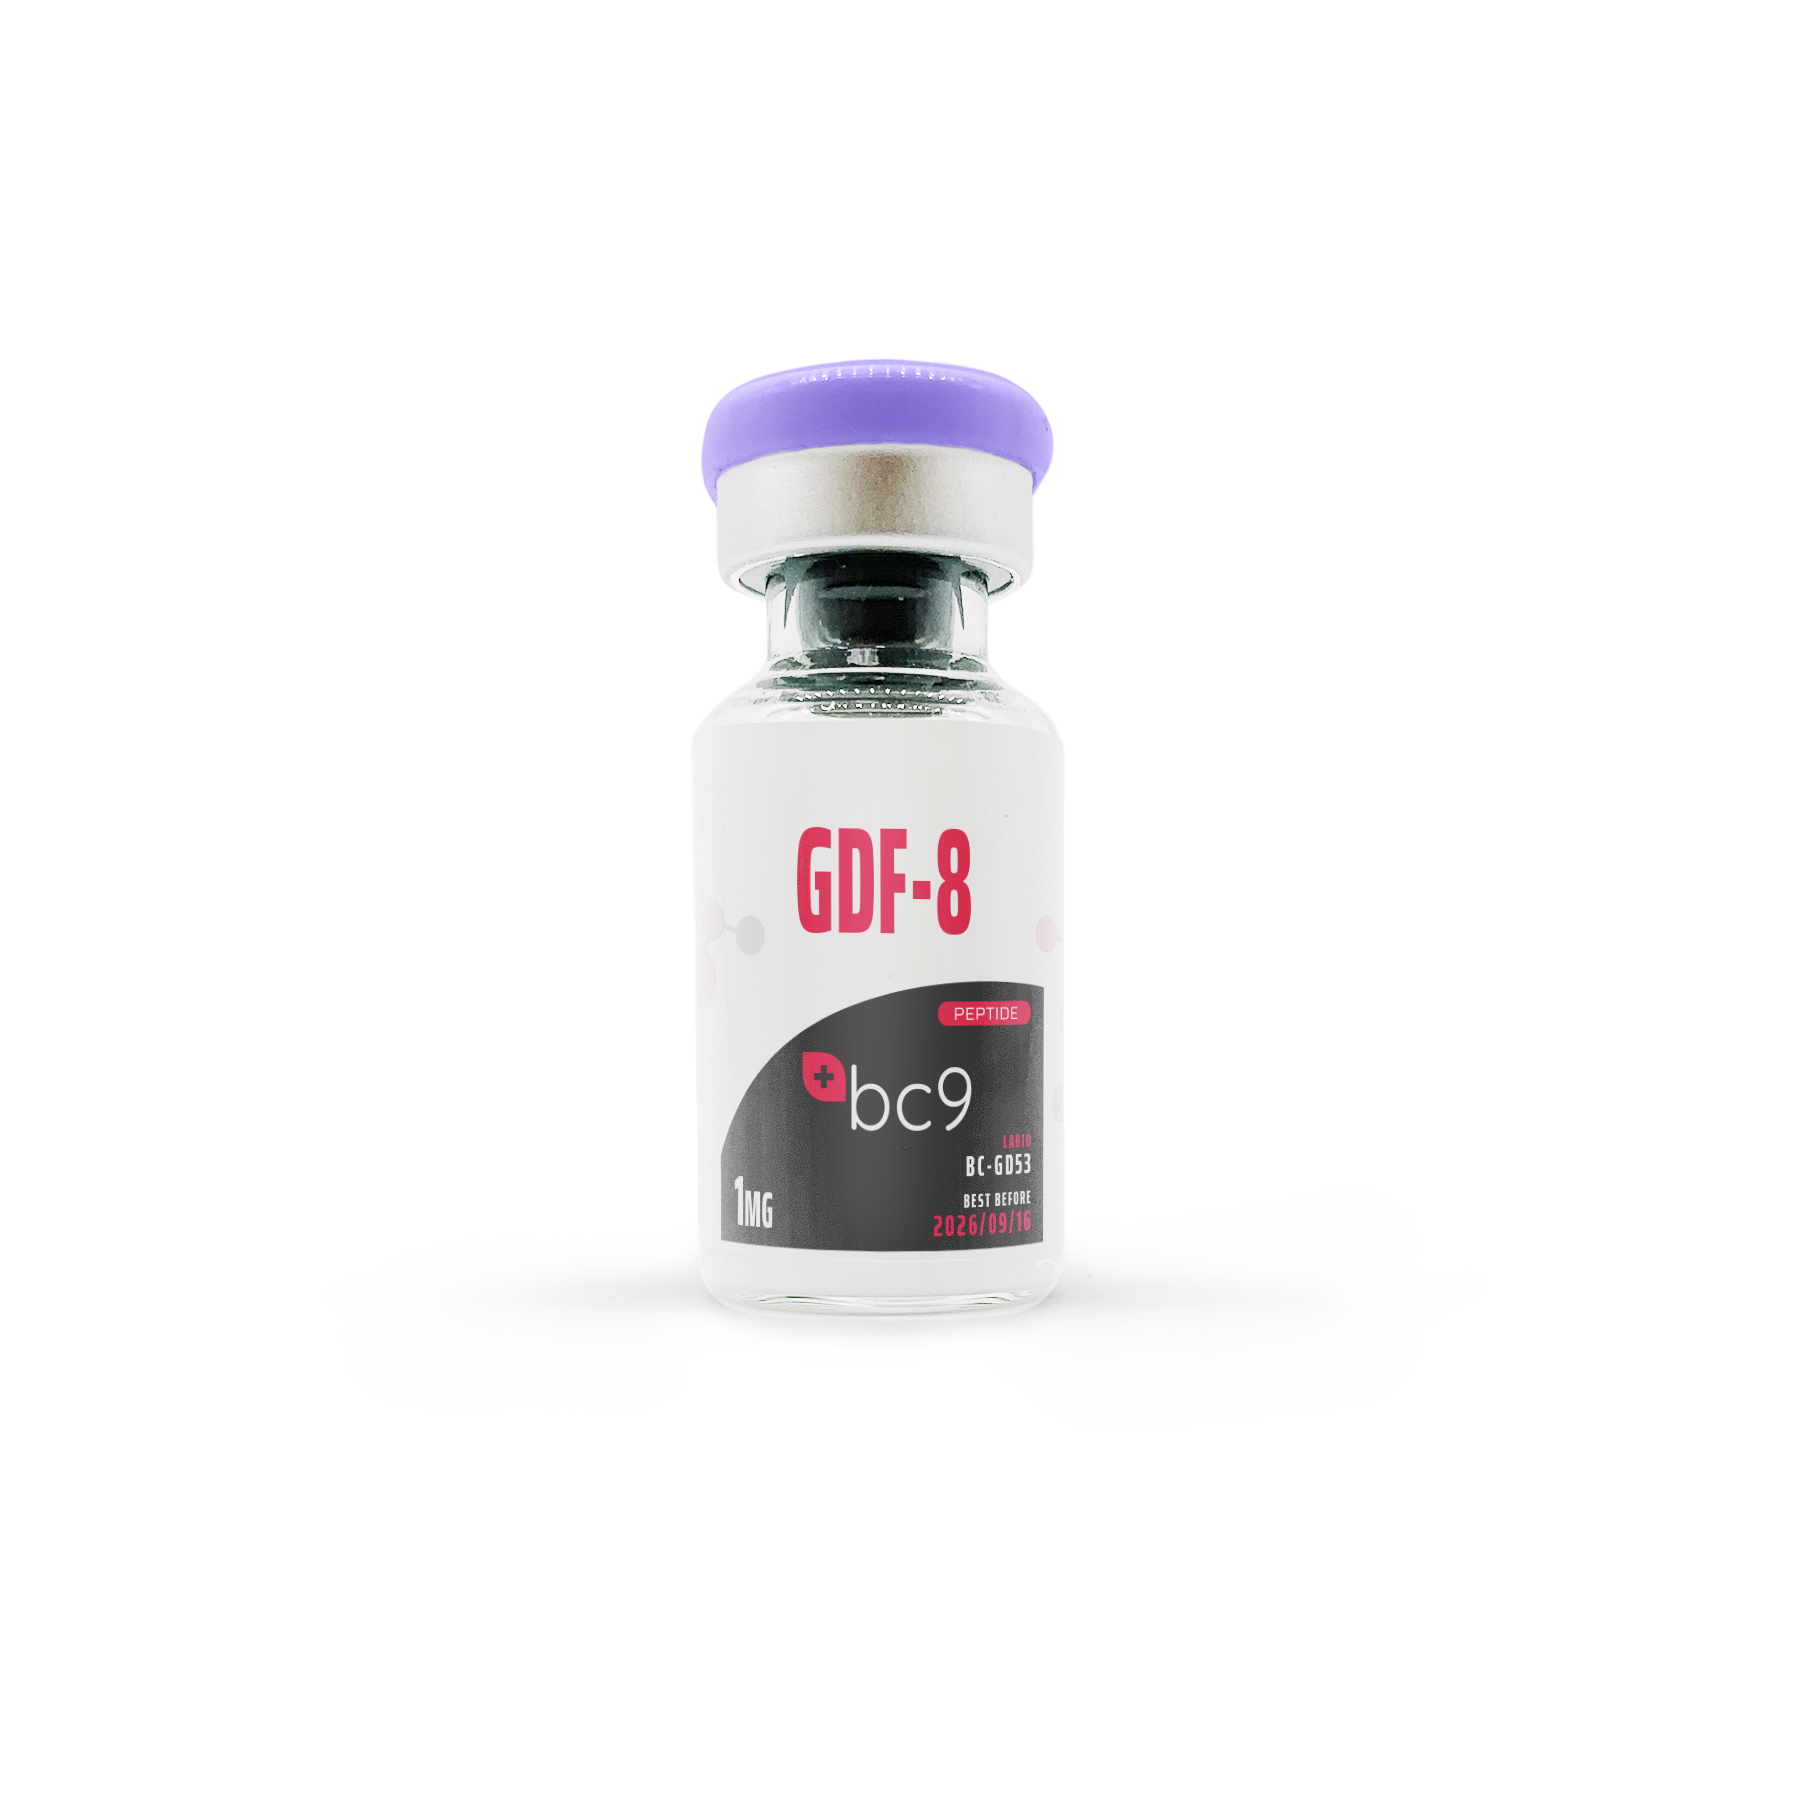 GDF-8 Peptide for Sale | Fast Shipping | BC9.org